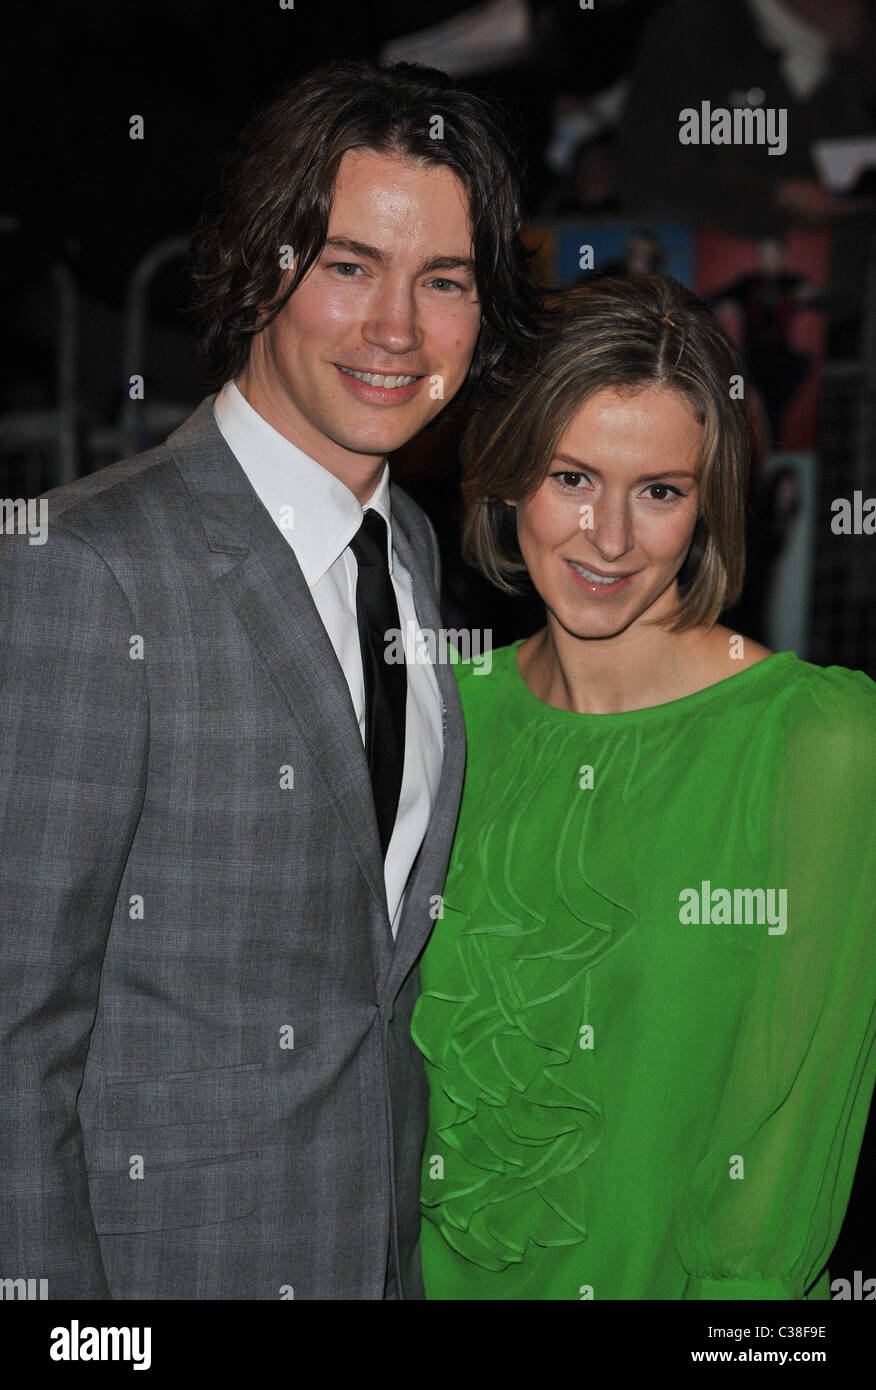 Tom Wisdom World Premiere of 'The Boat That Rocked' held at The Odeon, Leicester Square - arrivals London, England - 23.03.09 Stock Photo